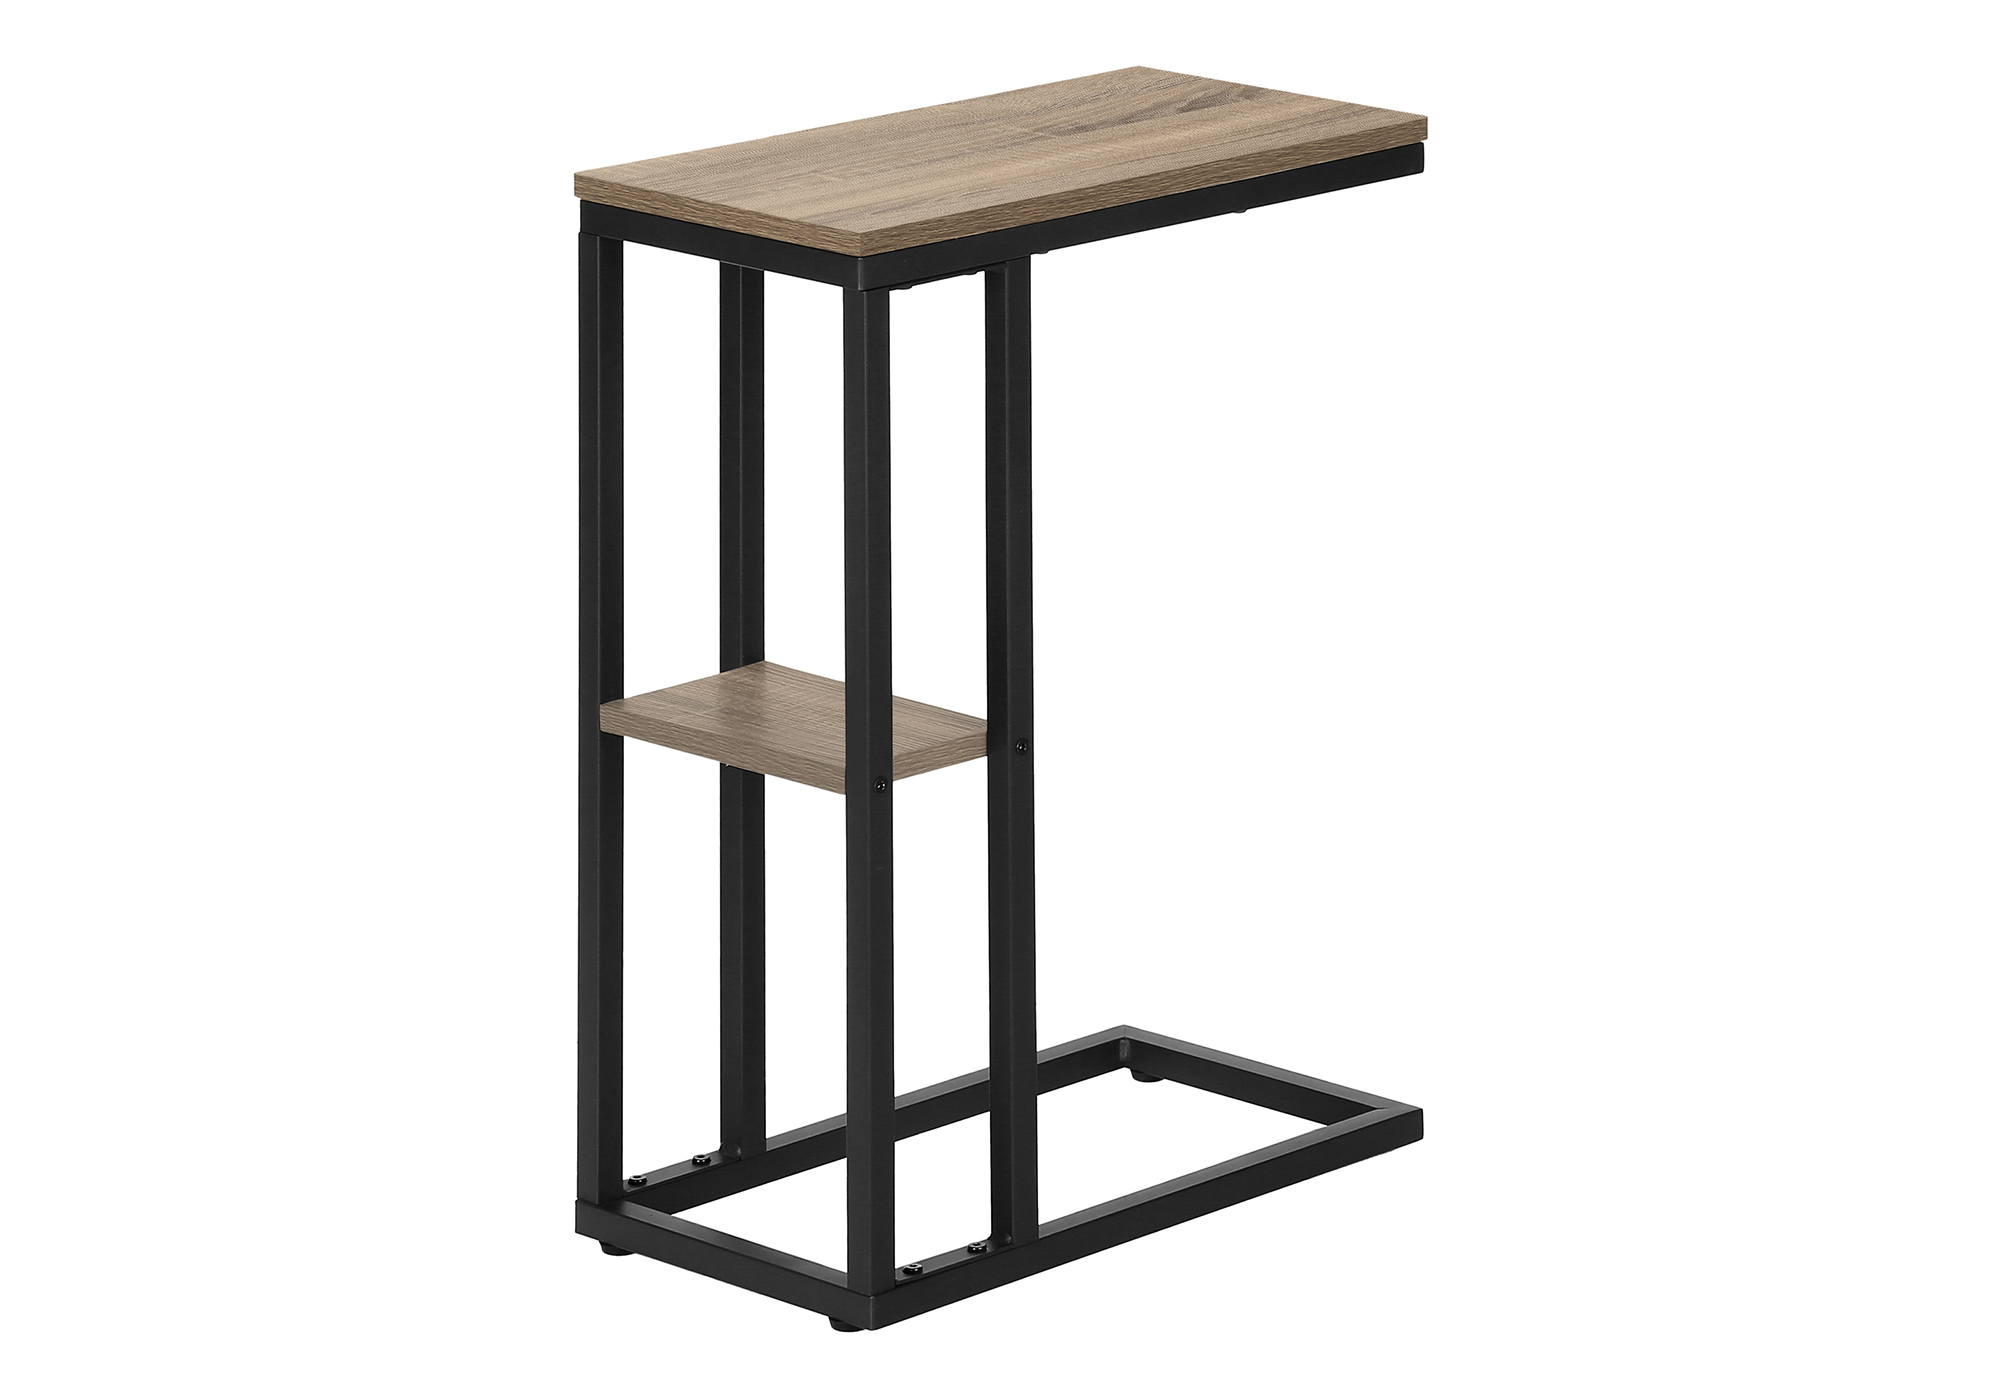 ACCENT TABLE - 25"H / DARK TAUPE / BLACK METAL